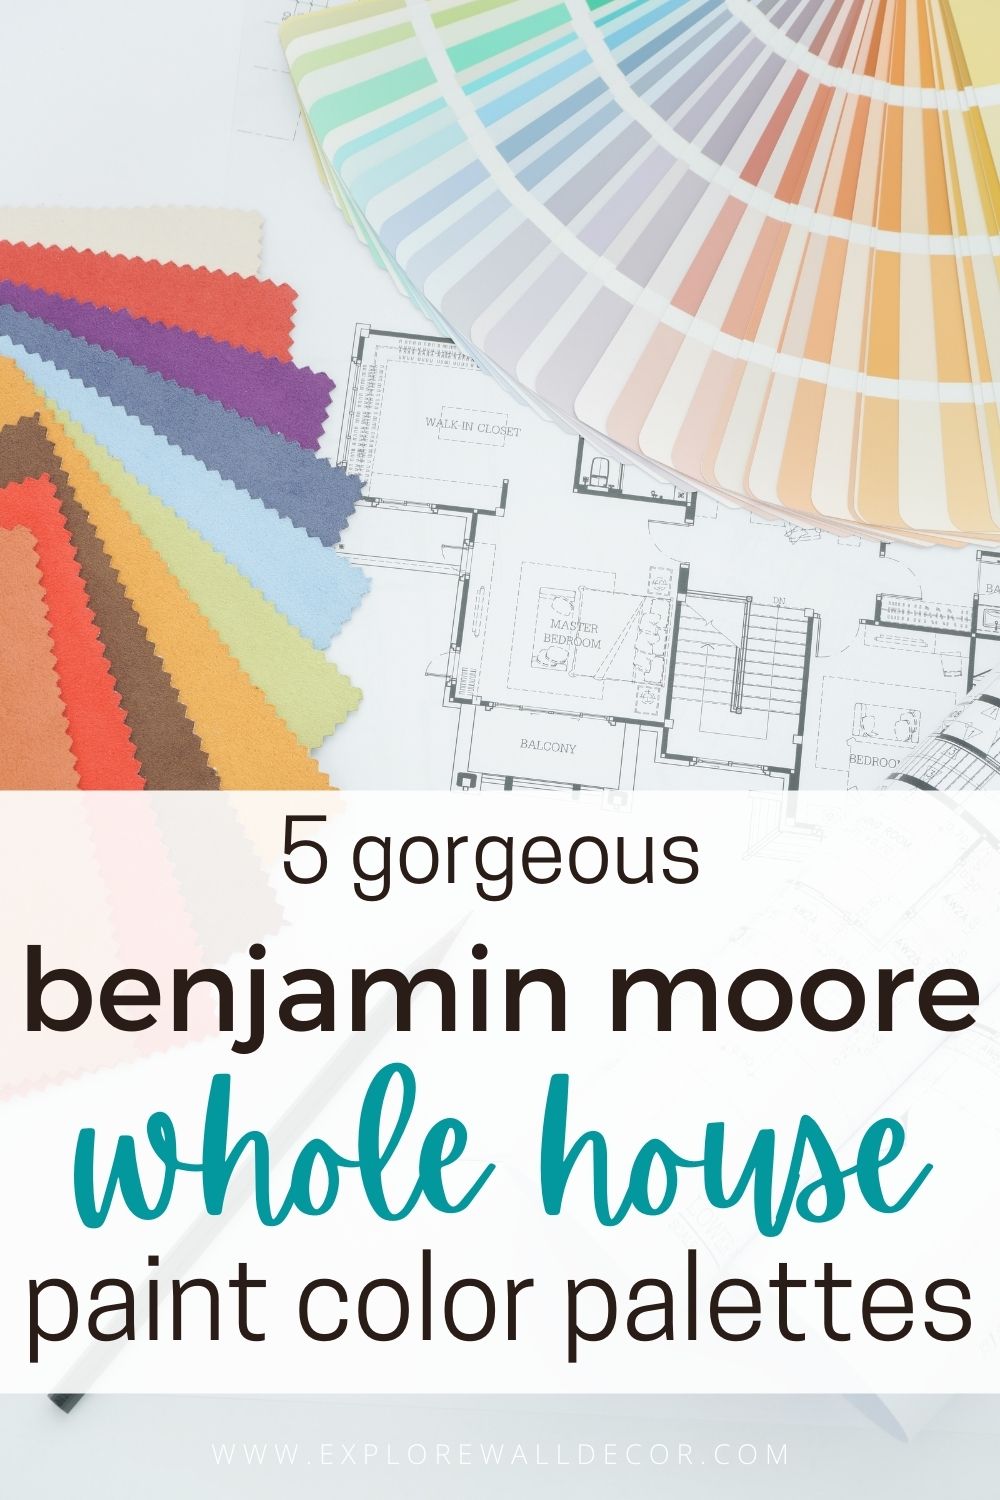 5 Great Options for a Whole House Color Palette from Benjamin Moore